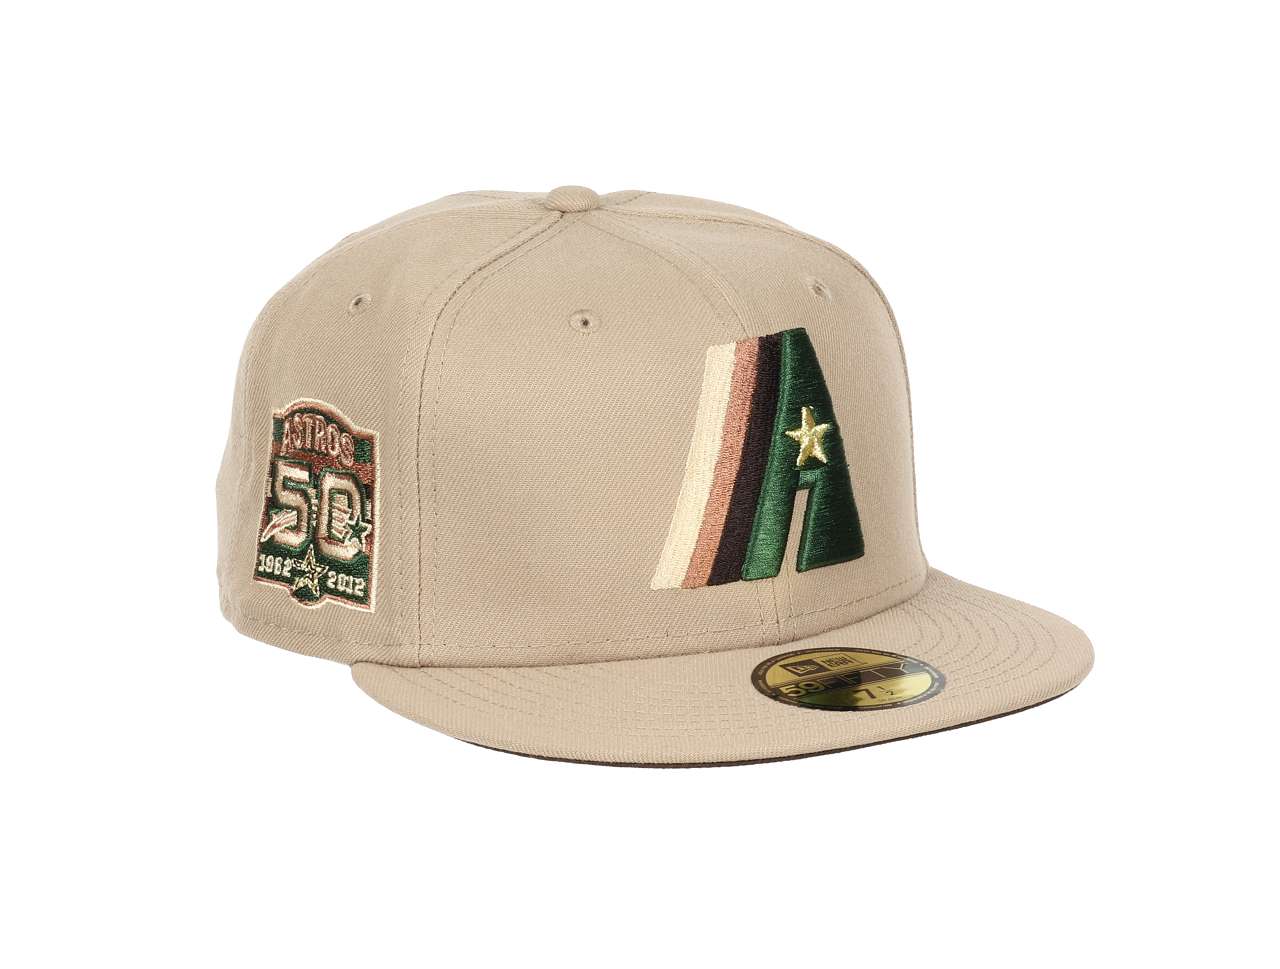 Houston Astros MLB Cooperstown 50th Anniversary Camel 59Fifty Basecap New Era